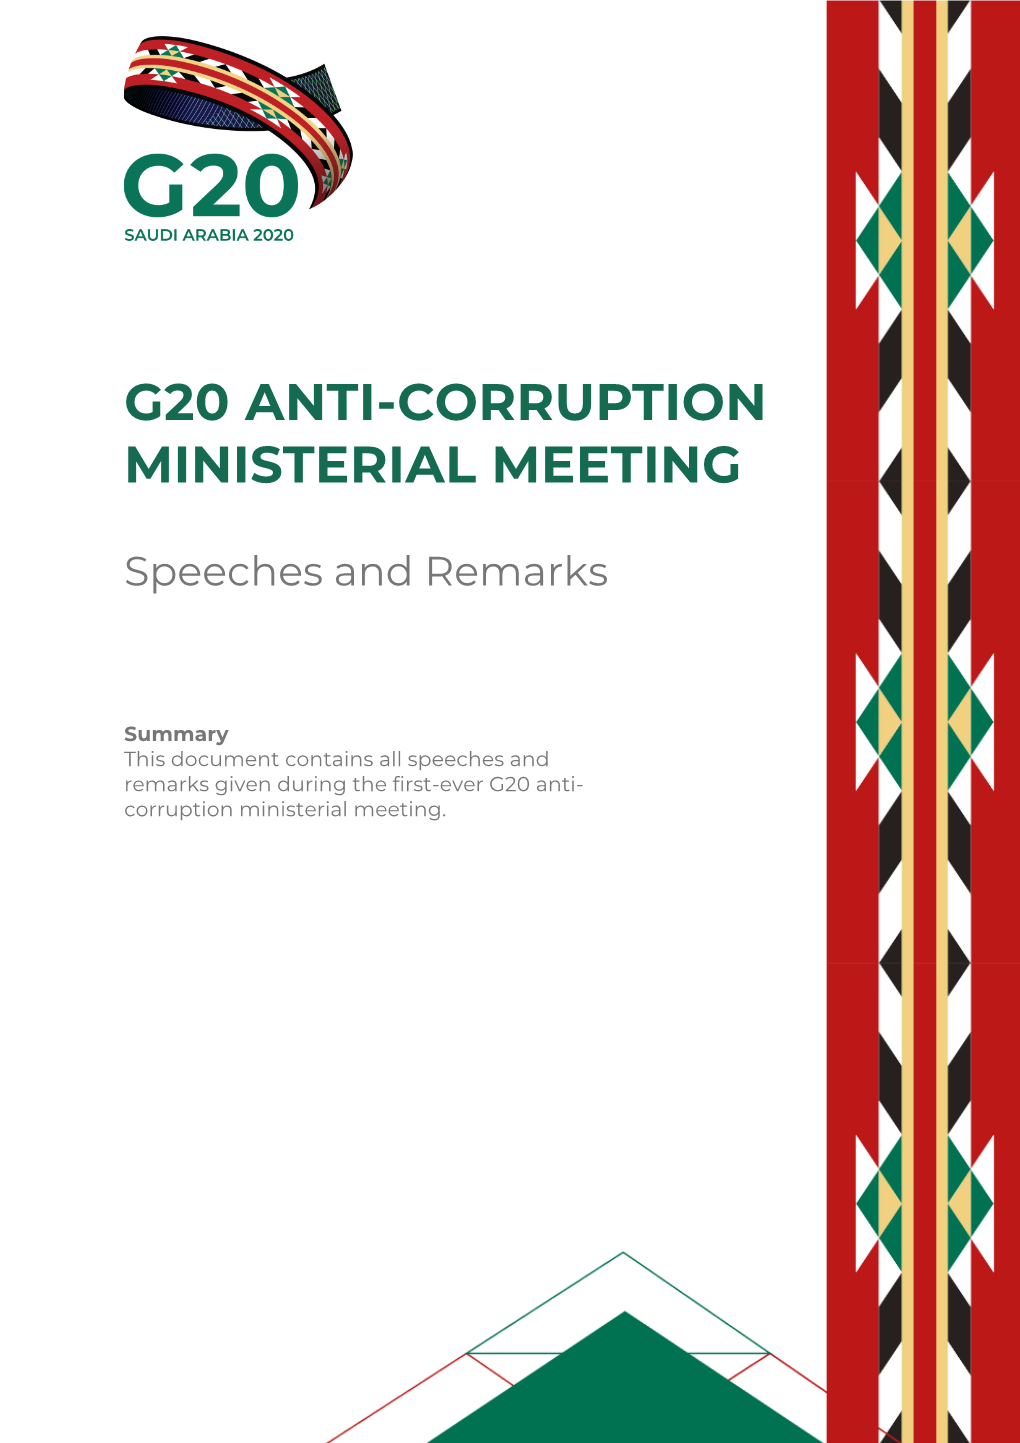 G20 Anti-Corruption Ministerial Meeting